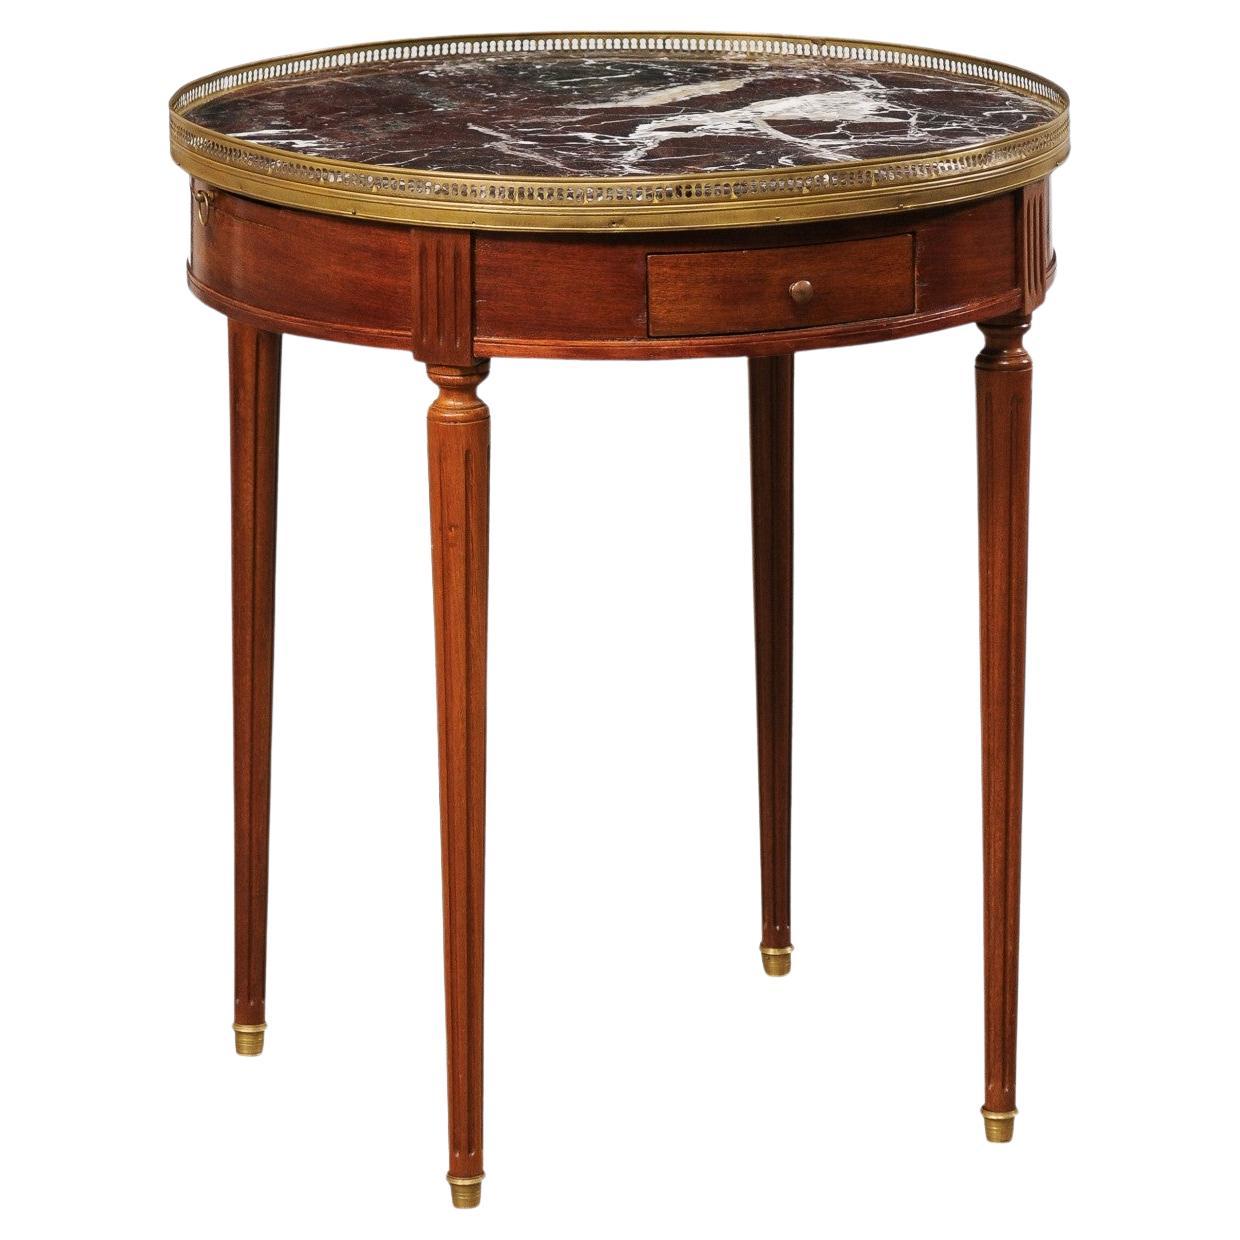 French Antique Round Cherry Wood Table W/Marble Top & Brass Gallery and Feet For Sale